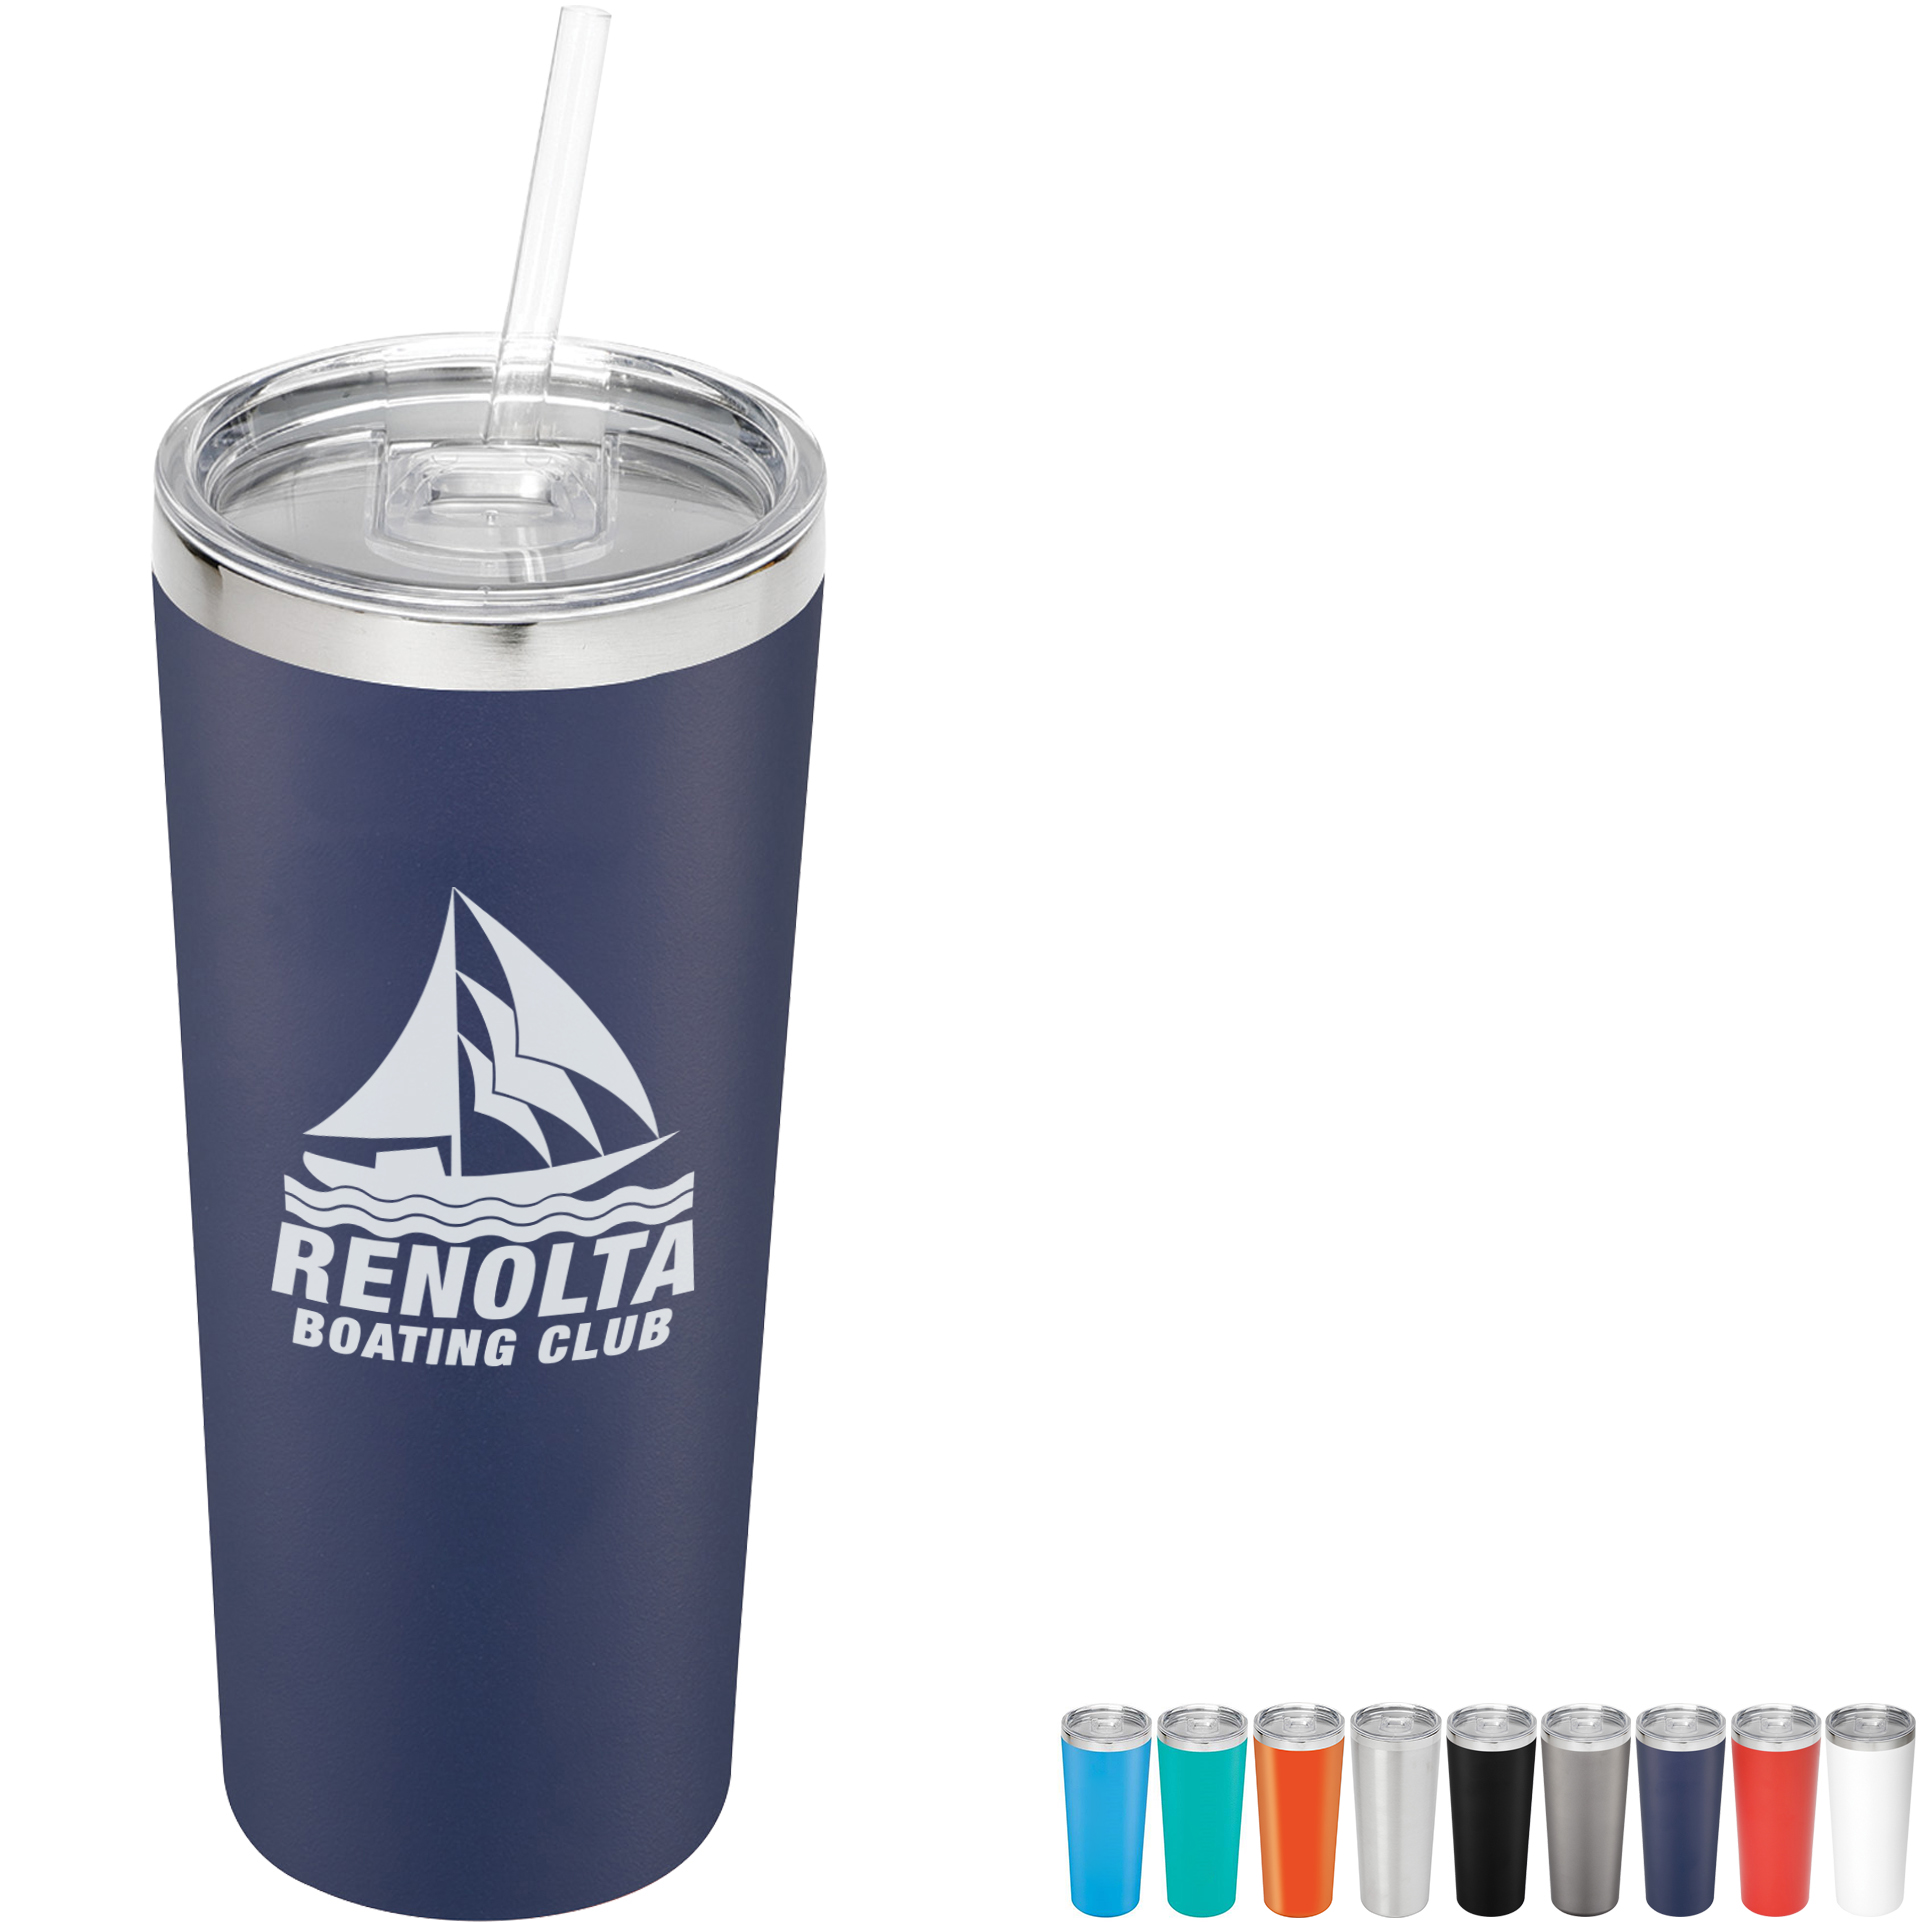 Glendale 20 Oz. Vacuum Insulated Stainless Steel Tumbler